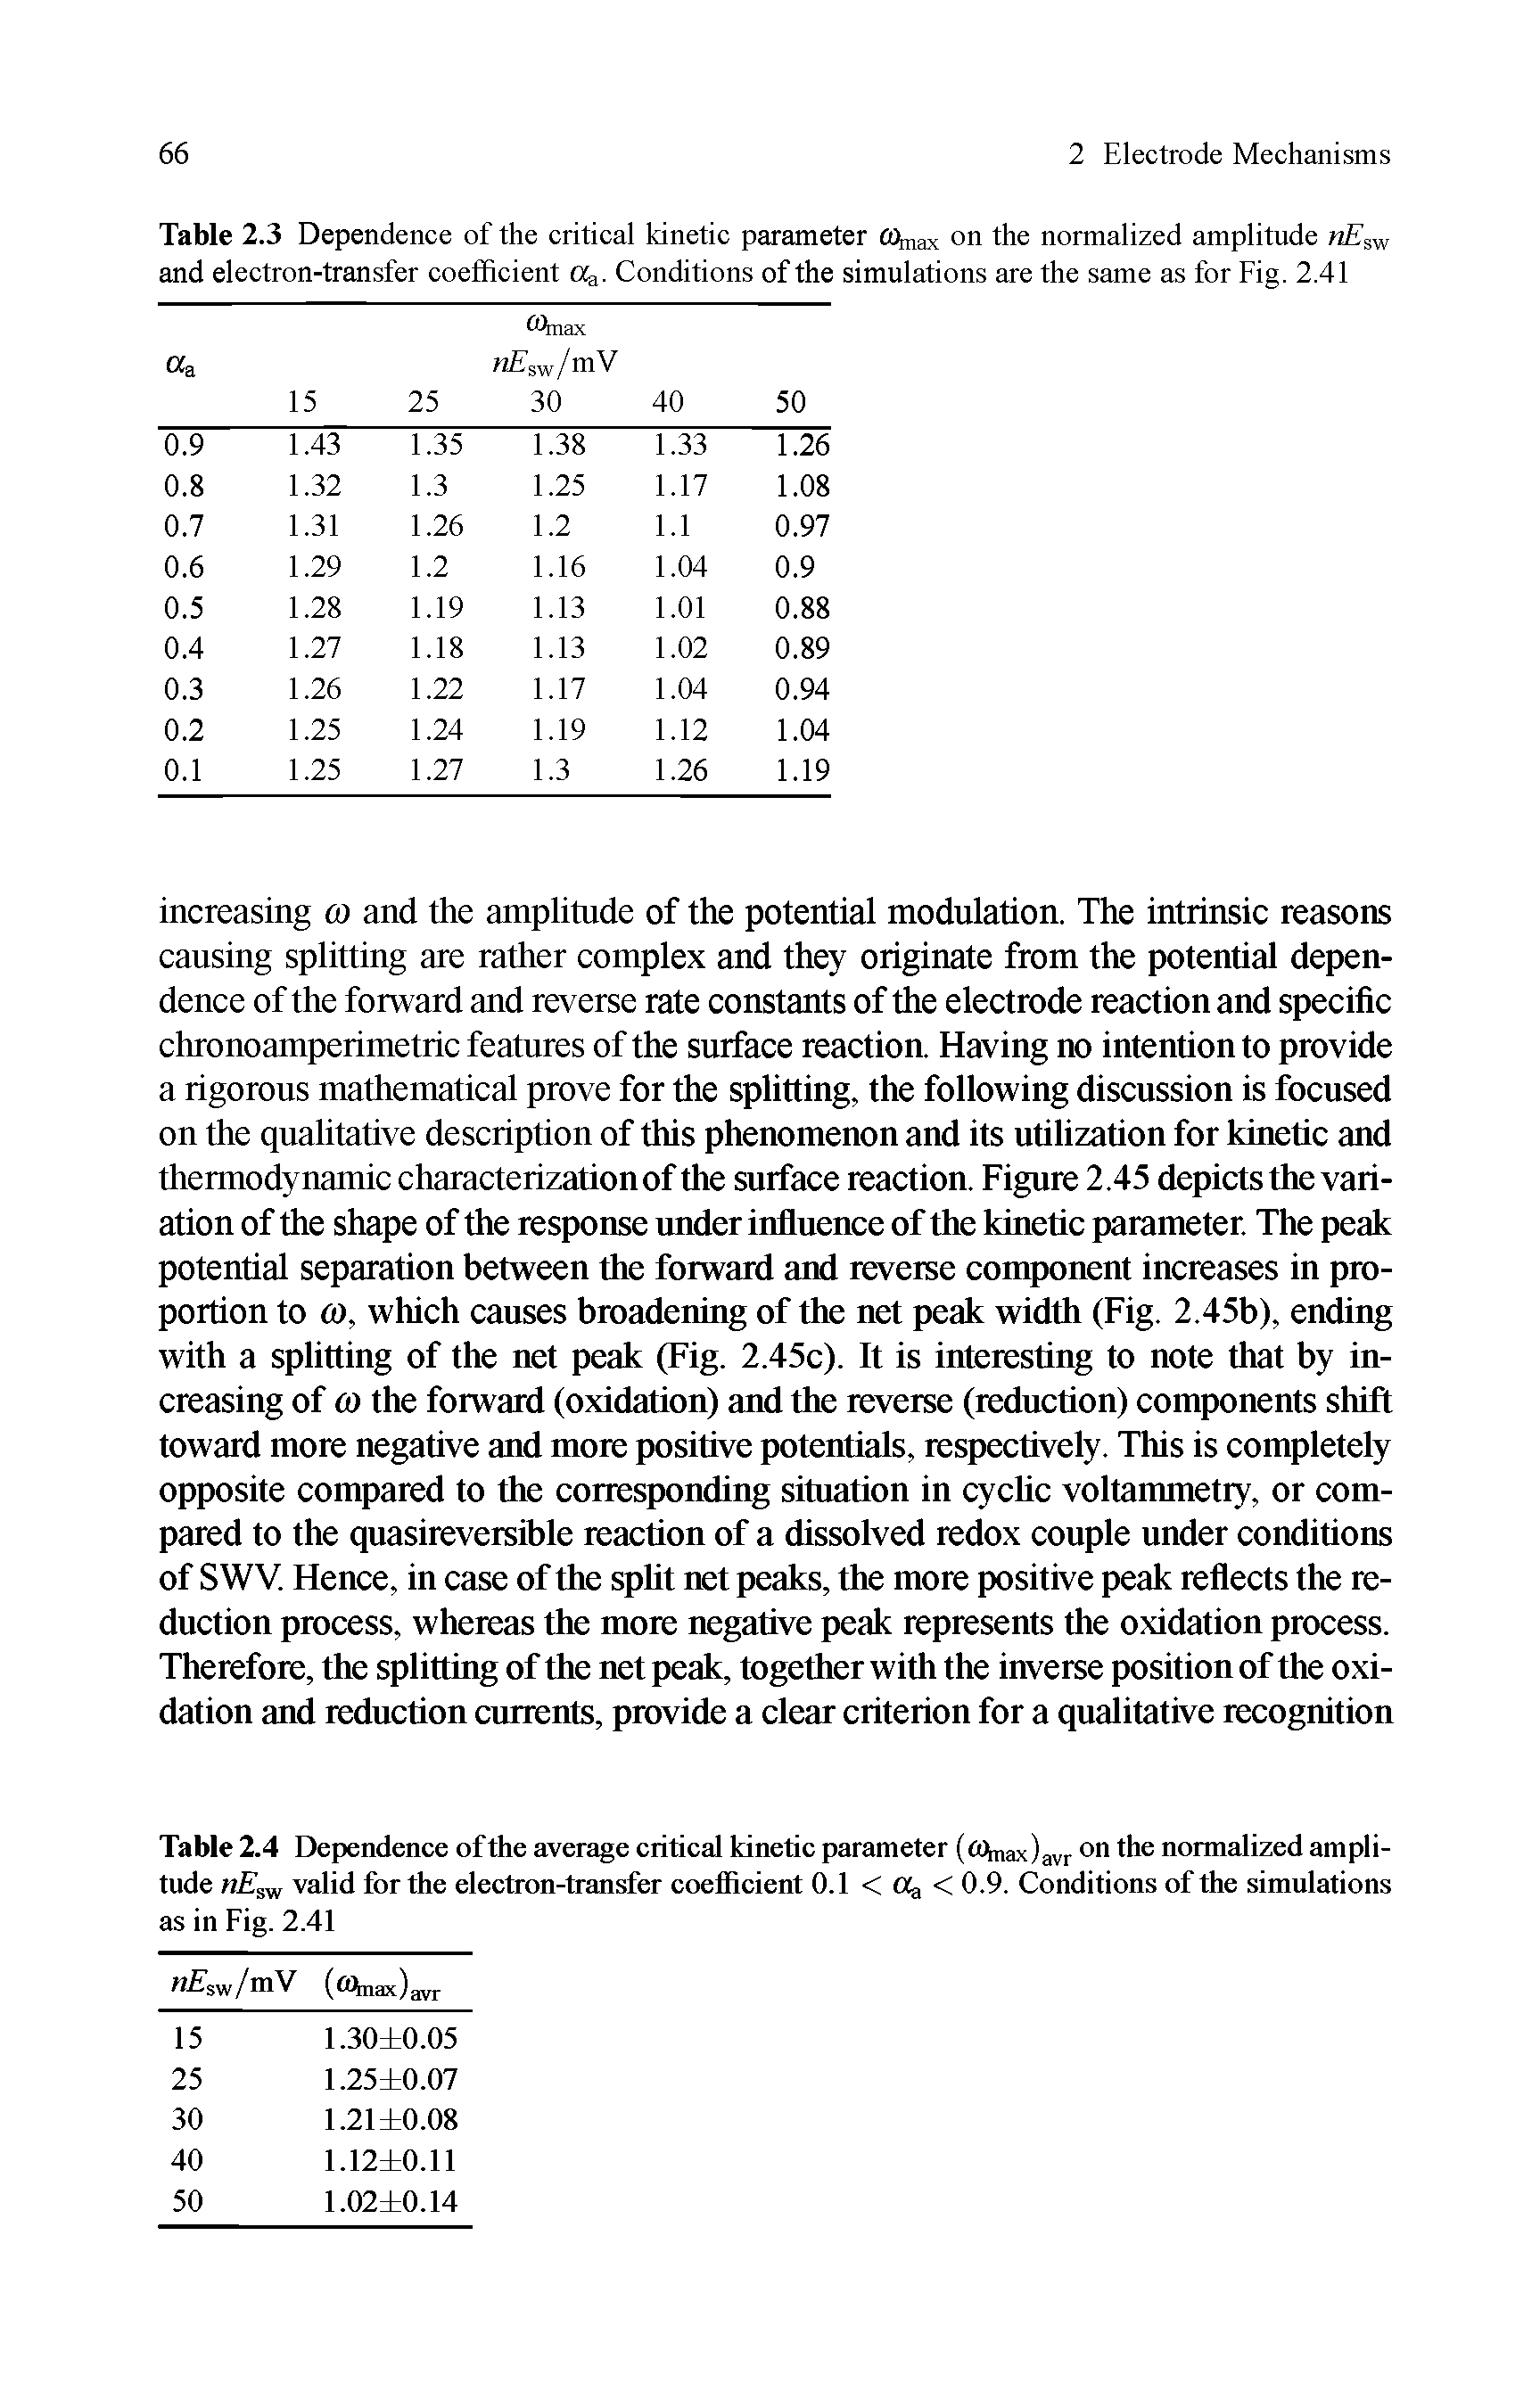 Table 2.4 Dependence ofthe average critical kinetic parameter (minax)avr normalized amplitude nEs valid for the electron-transfer coefficient 0.1 < cq < 0.9. Conditions ofthe simulations as in Fig. 2.41...